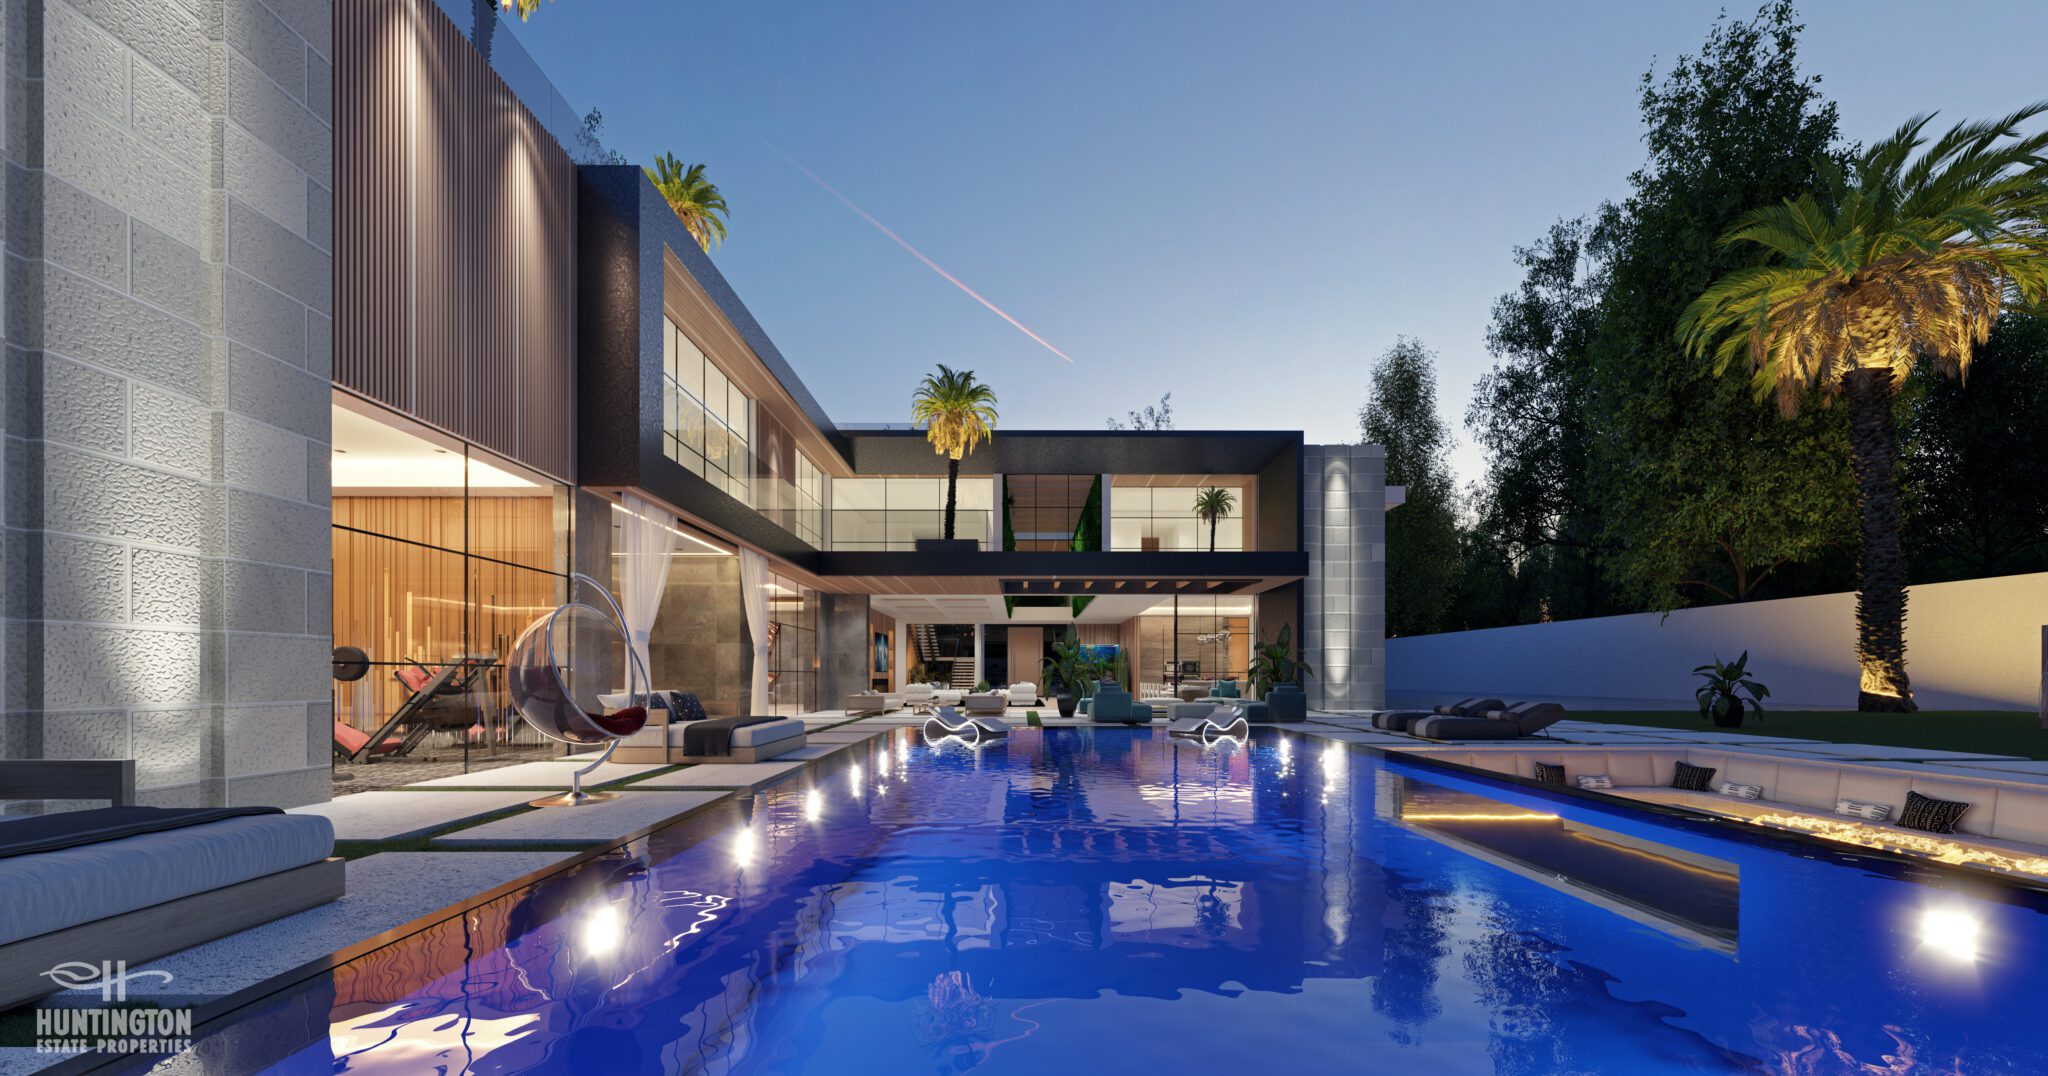 luxury outdoor pool at evening hours